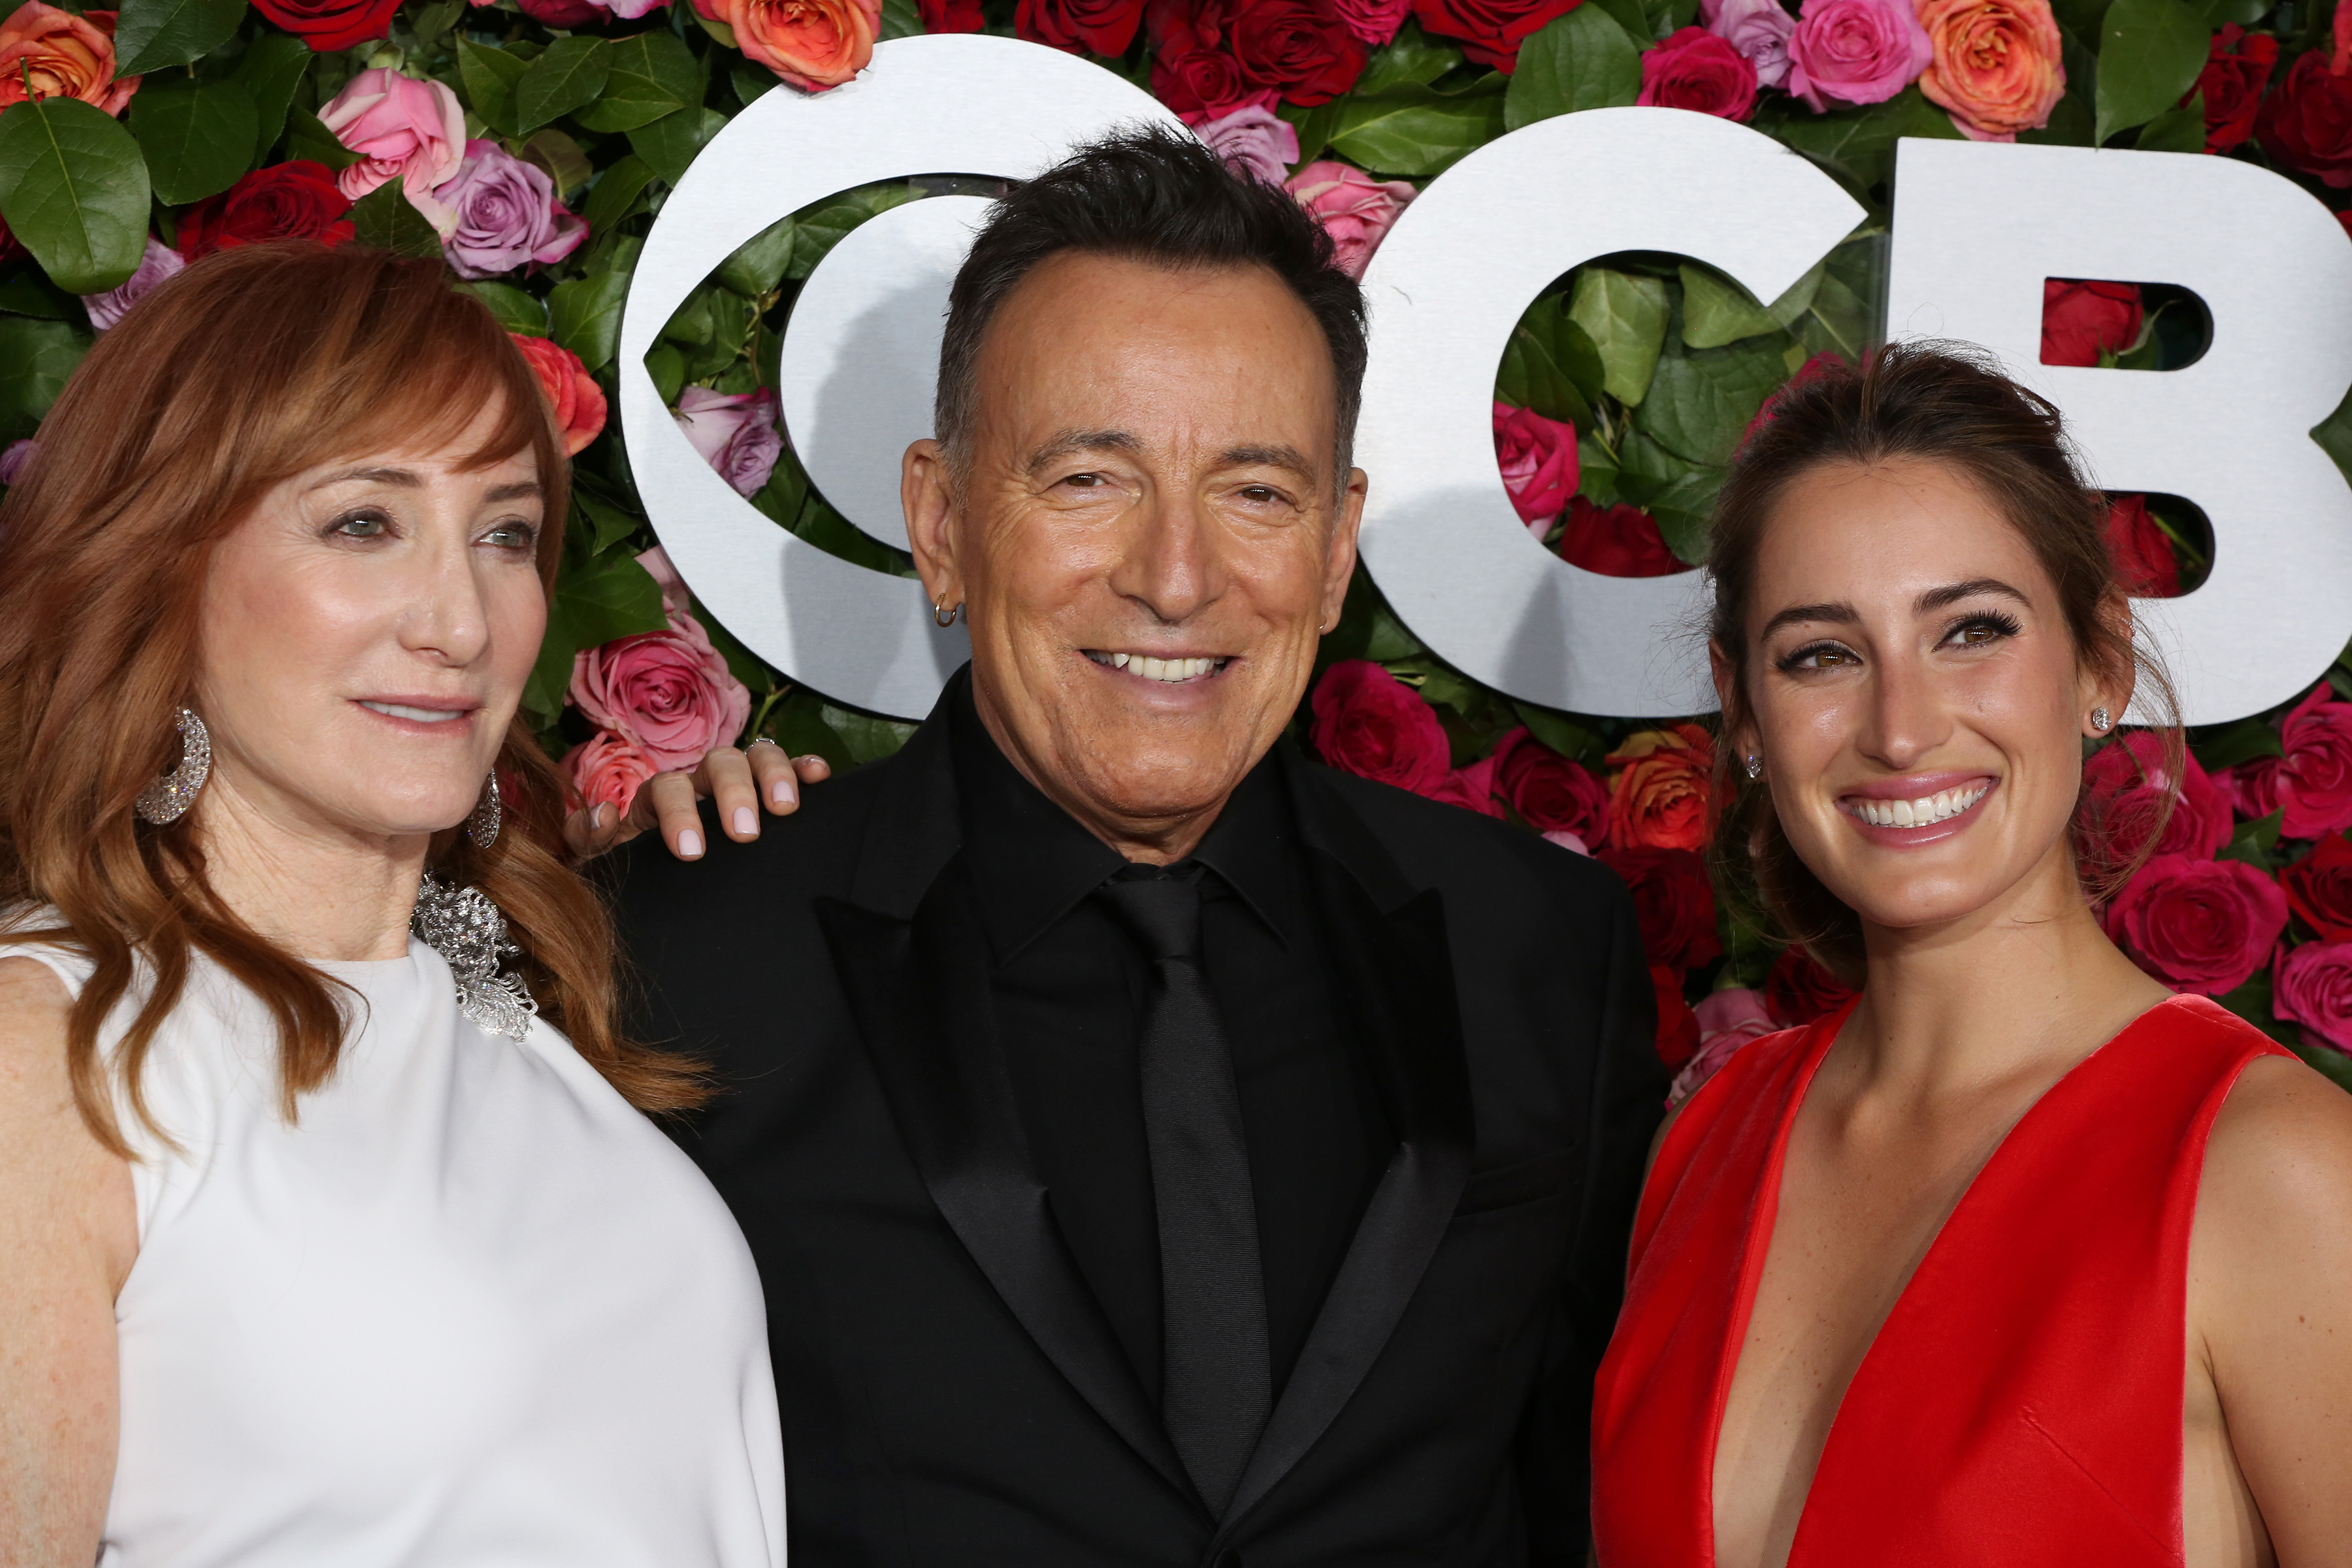 Patti Scialfa, Bruce Springsteen, and Jessica Springsteen in New York City. on June 10, 2018 | Source: Getty Images